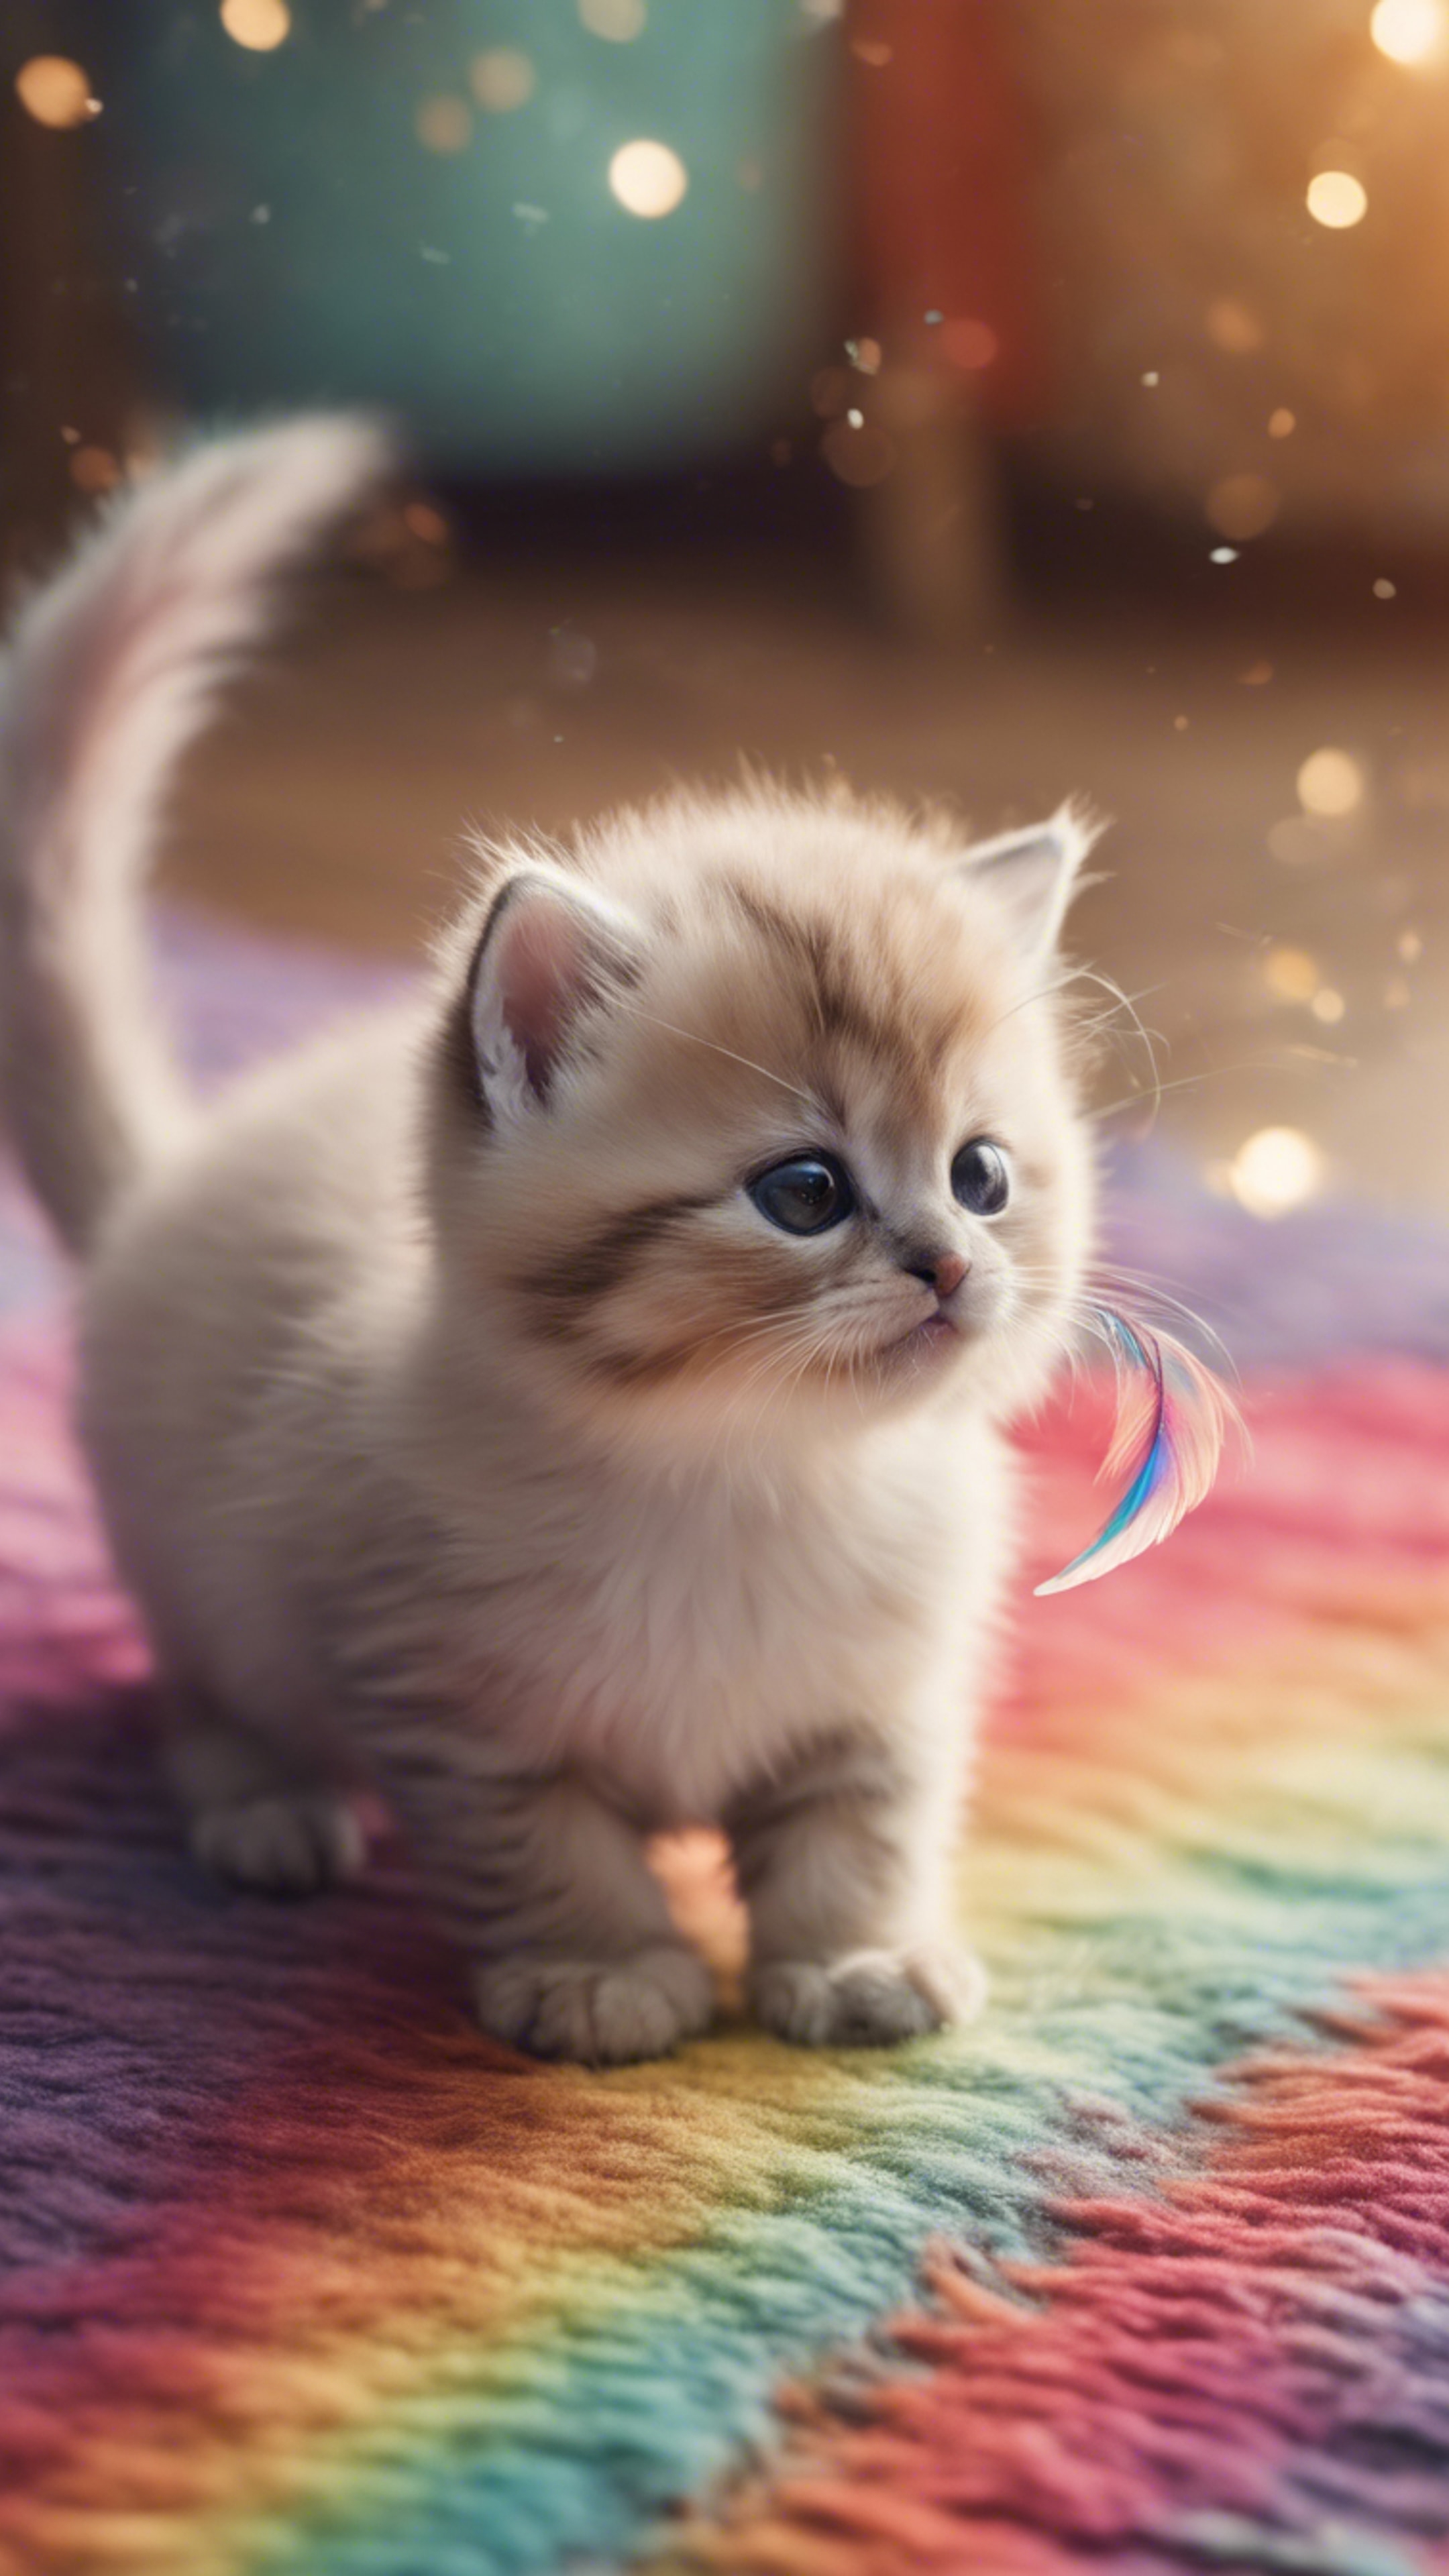 A Munchkin kitten with its short legs and fluffy fur, playing merrily with a feather on a rainbow-colored rug. Wallpaper[c170750e7e8c433496e0]